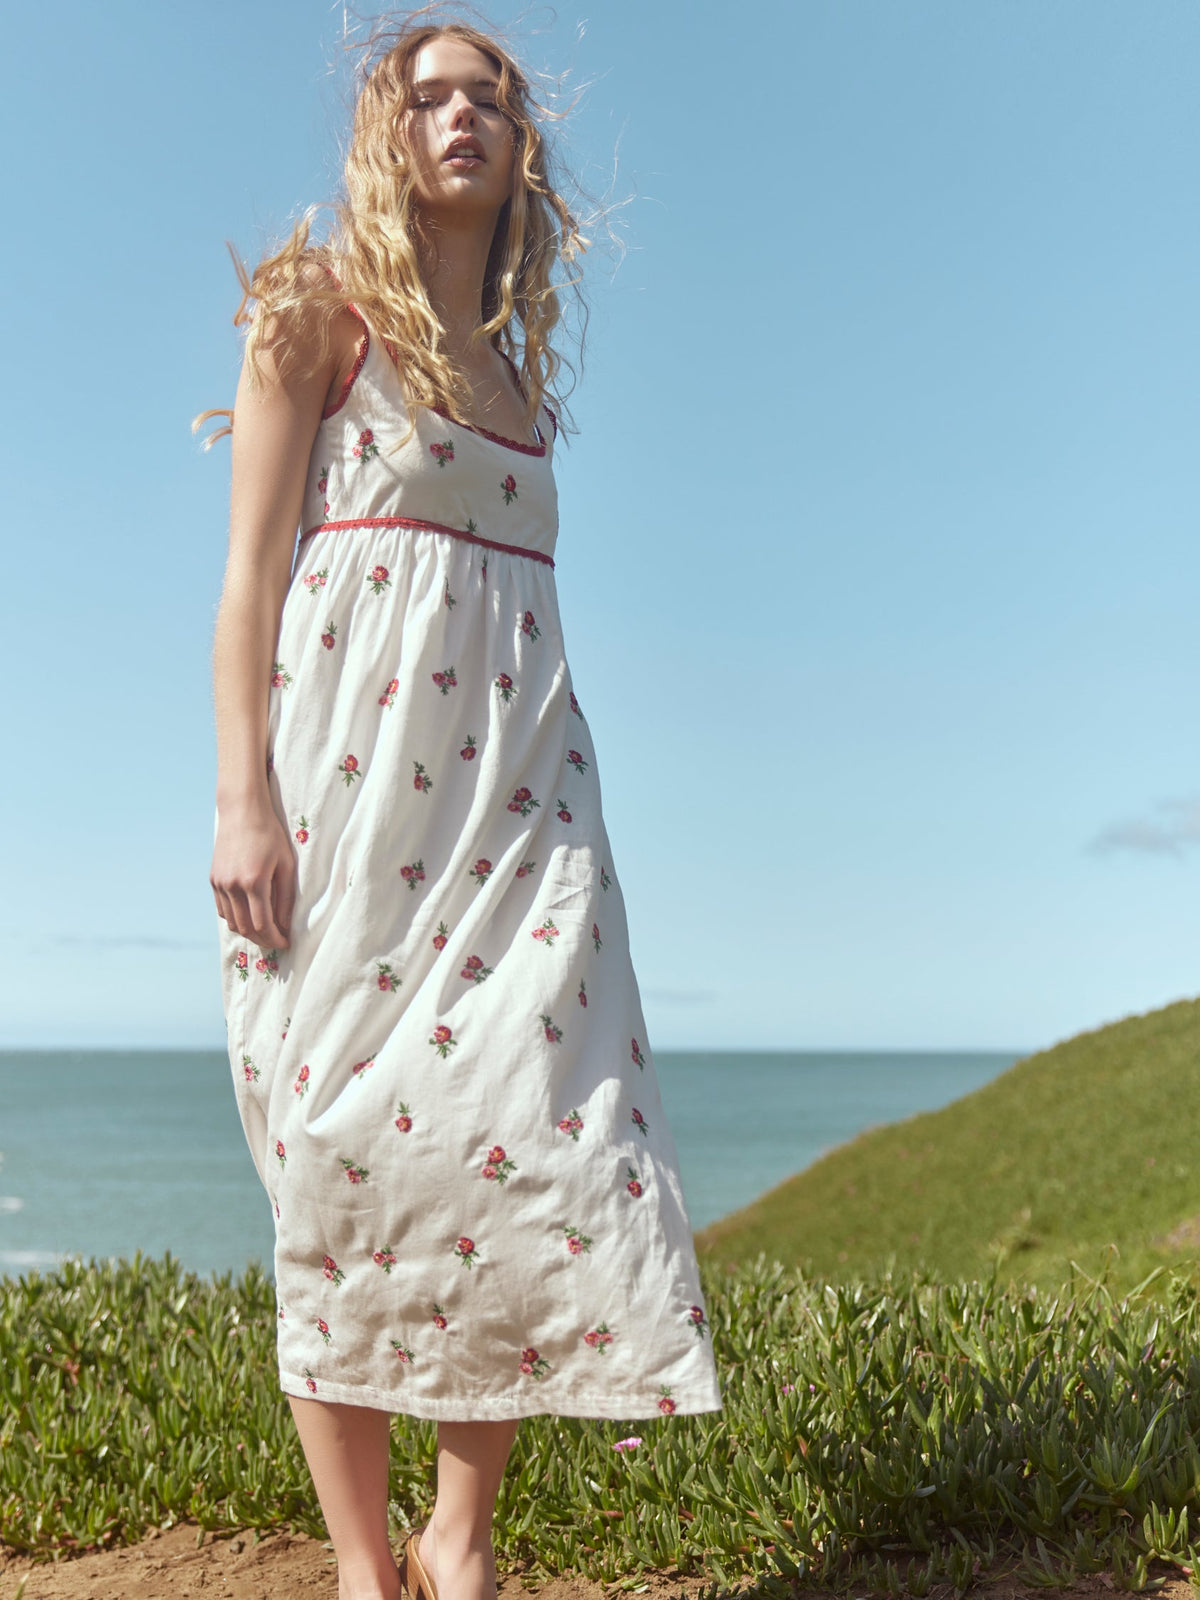 Emily Embroidered Midi Dress in Sugar/Salsa Ditsy Floral Embroidery